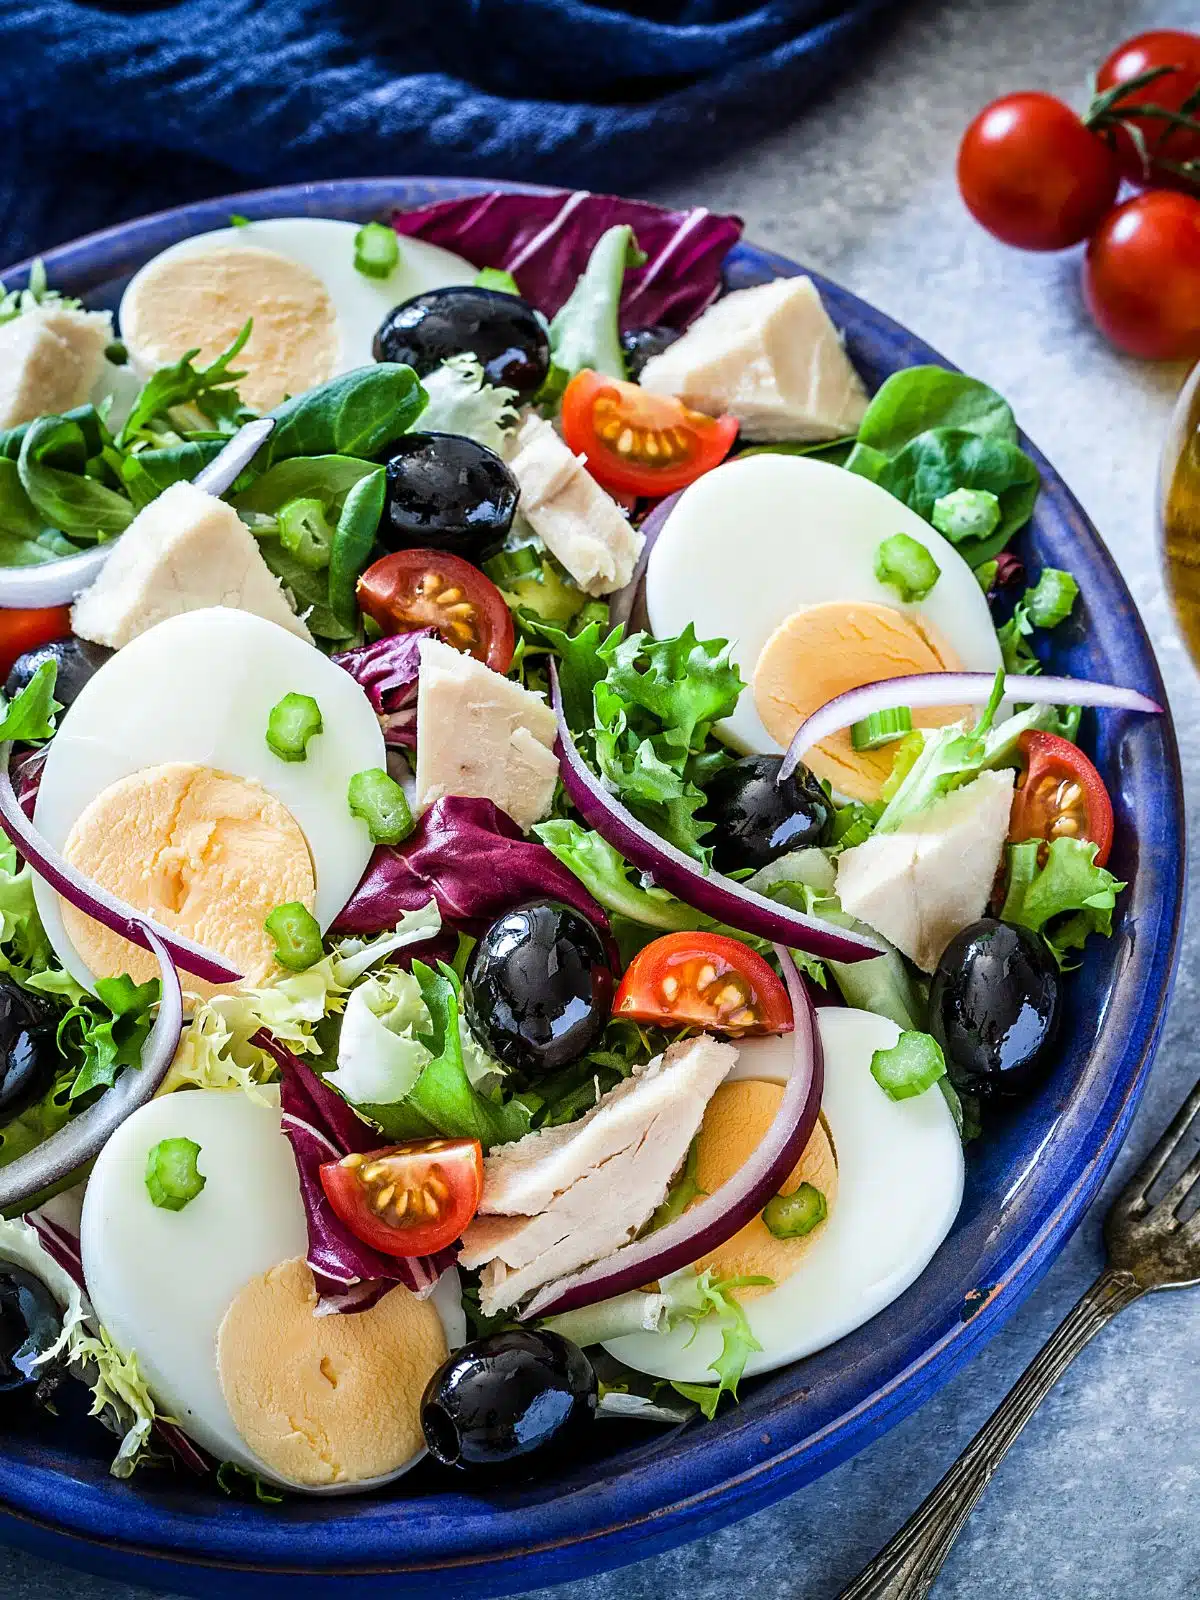 Salad with hard boiled eggs, black olives, red onion and tomatoes.